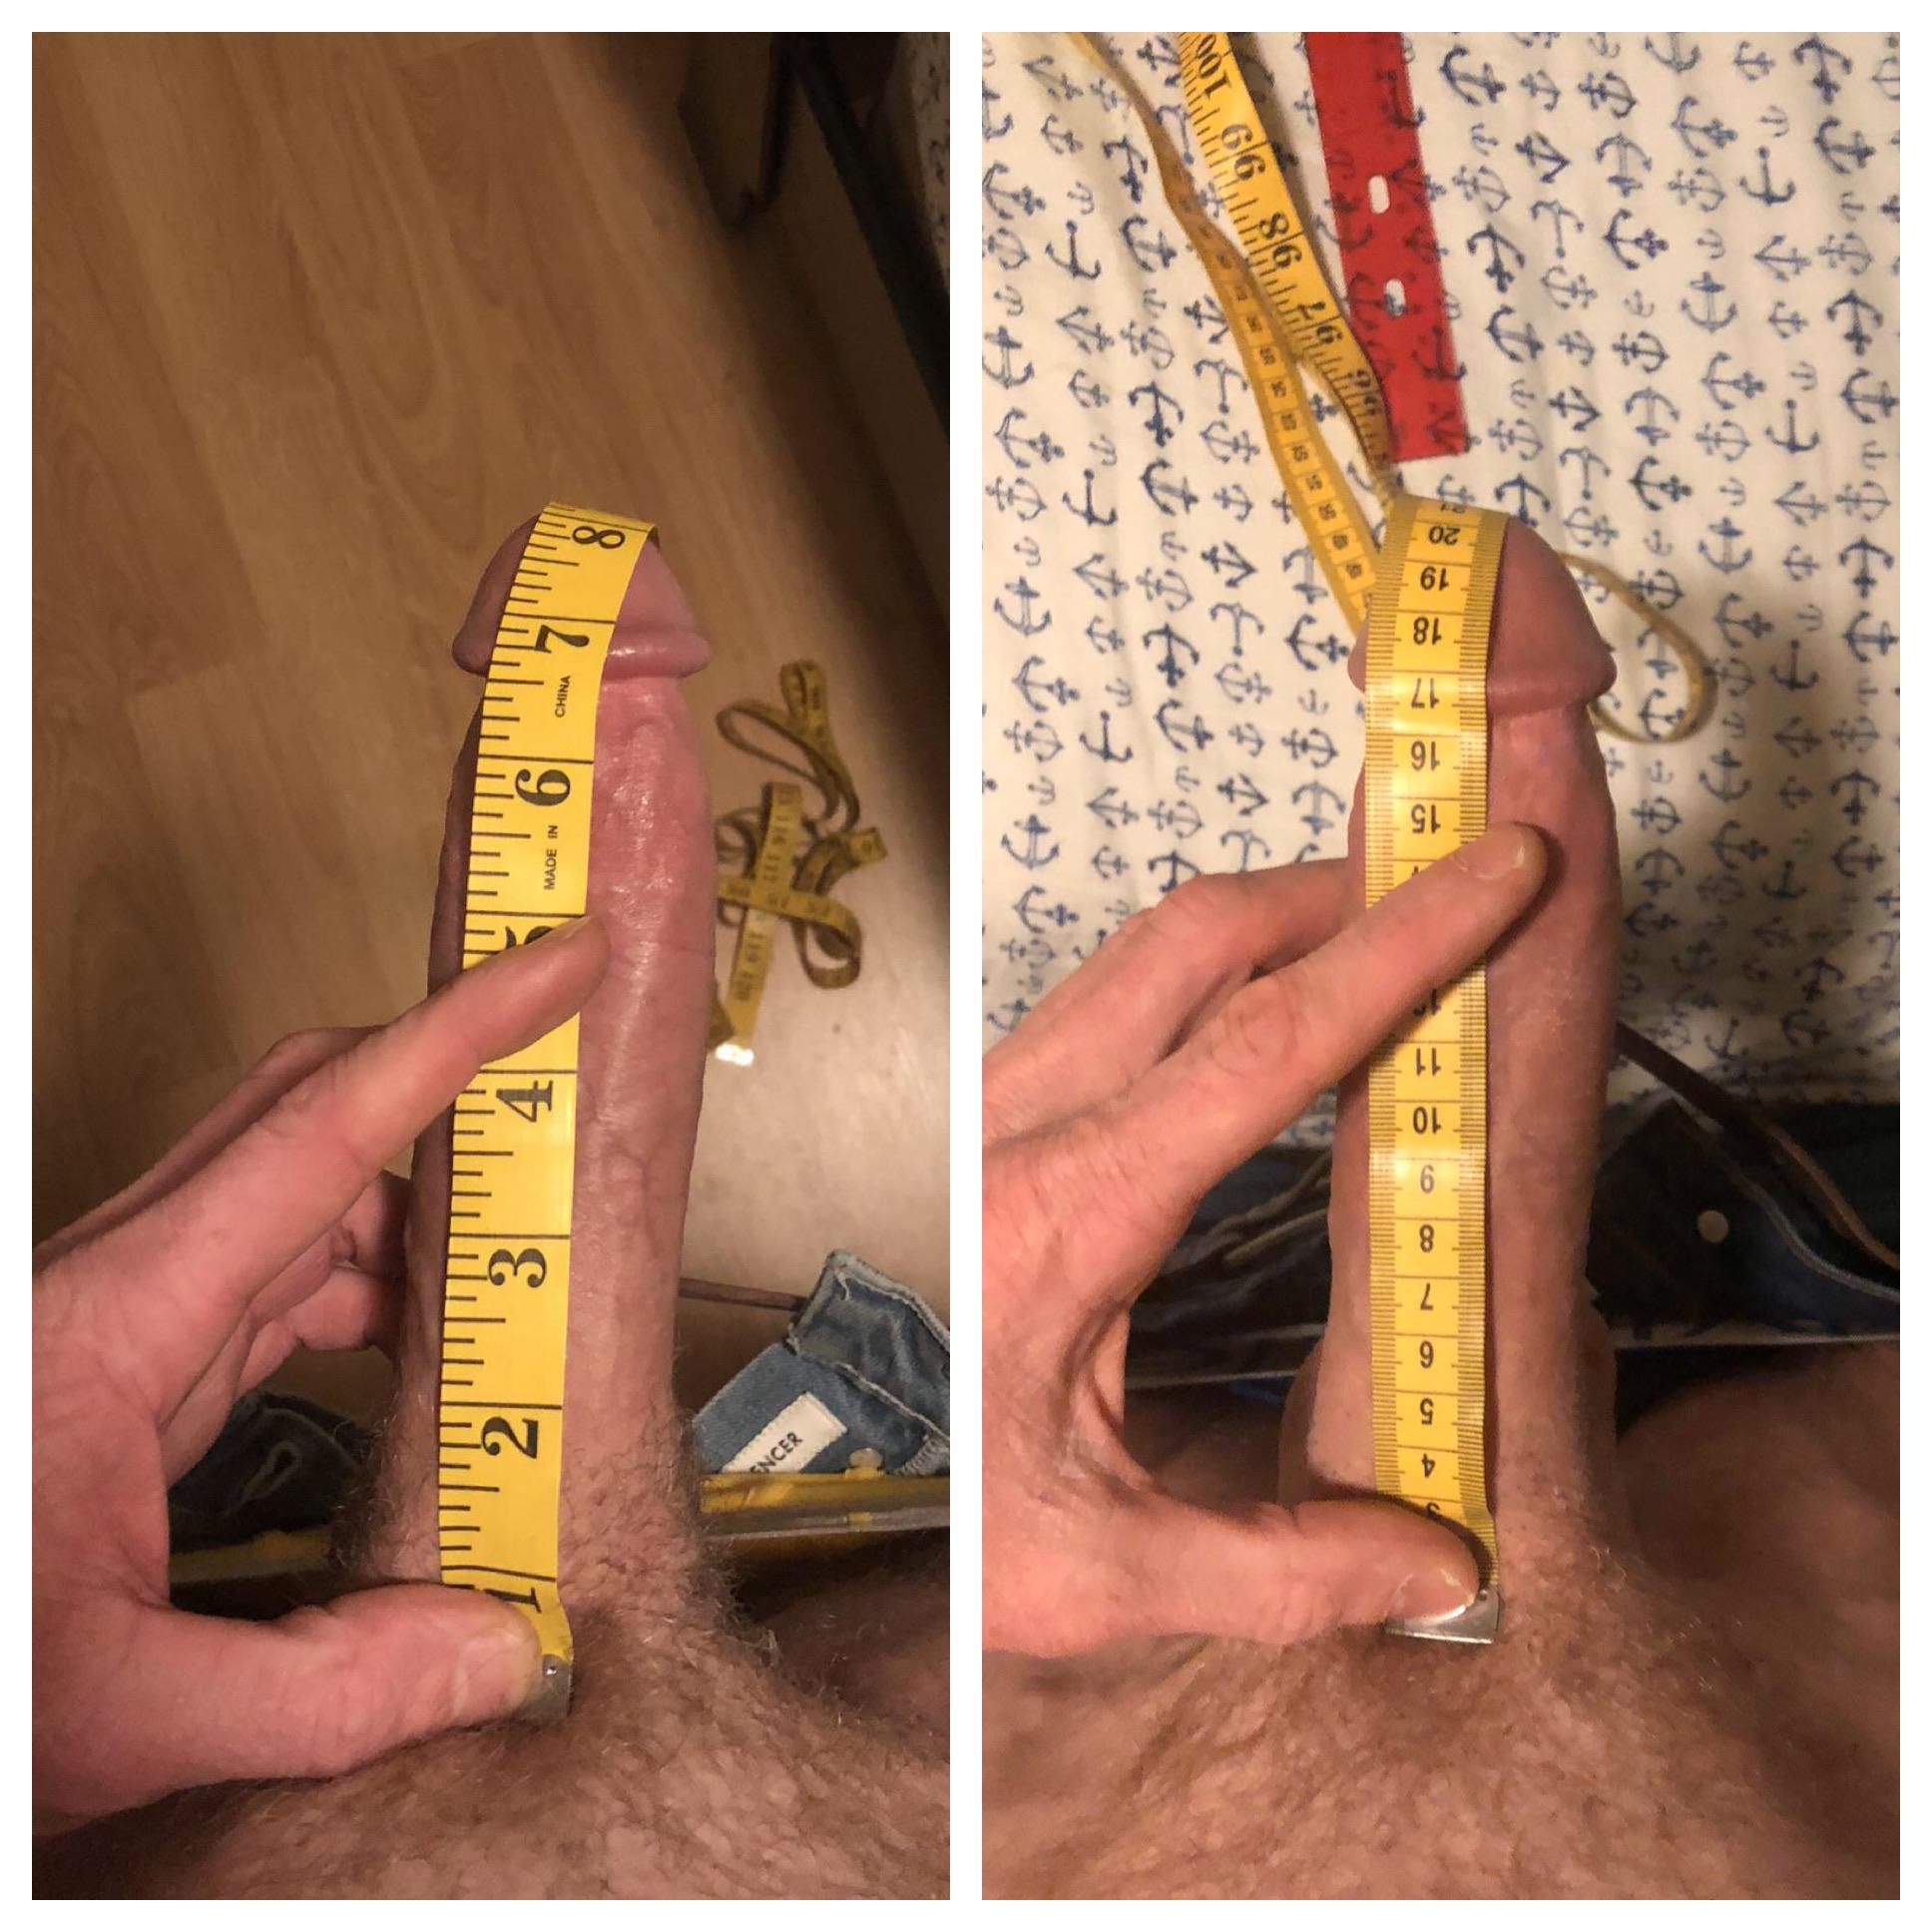 charlie concannon share 9 inch dick next to ruler photos